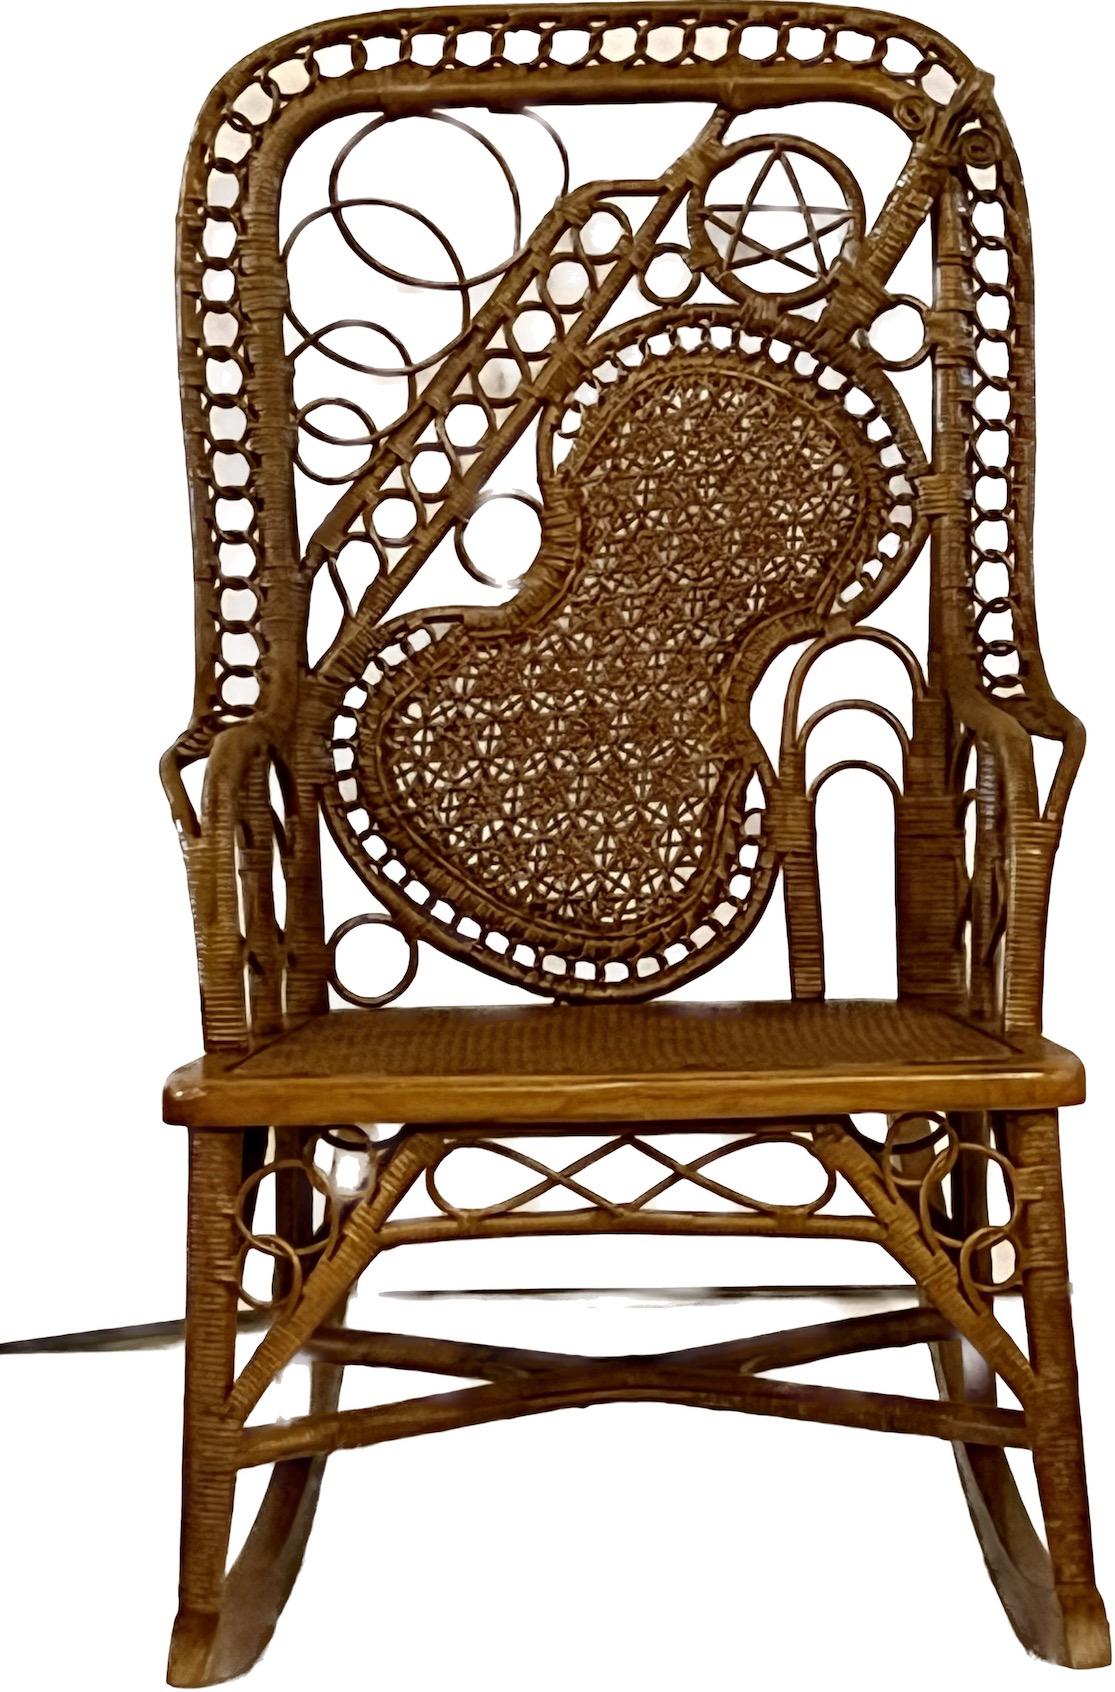 A very rare wicker rocker by the Wakefield Rattan Company, Wakefield Massachusetts, C. 1890s in wonderful condition. This rocker is part of a matching set which can be purchased separate or together.The set  consists of the Mothers rocker and